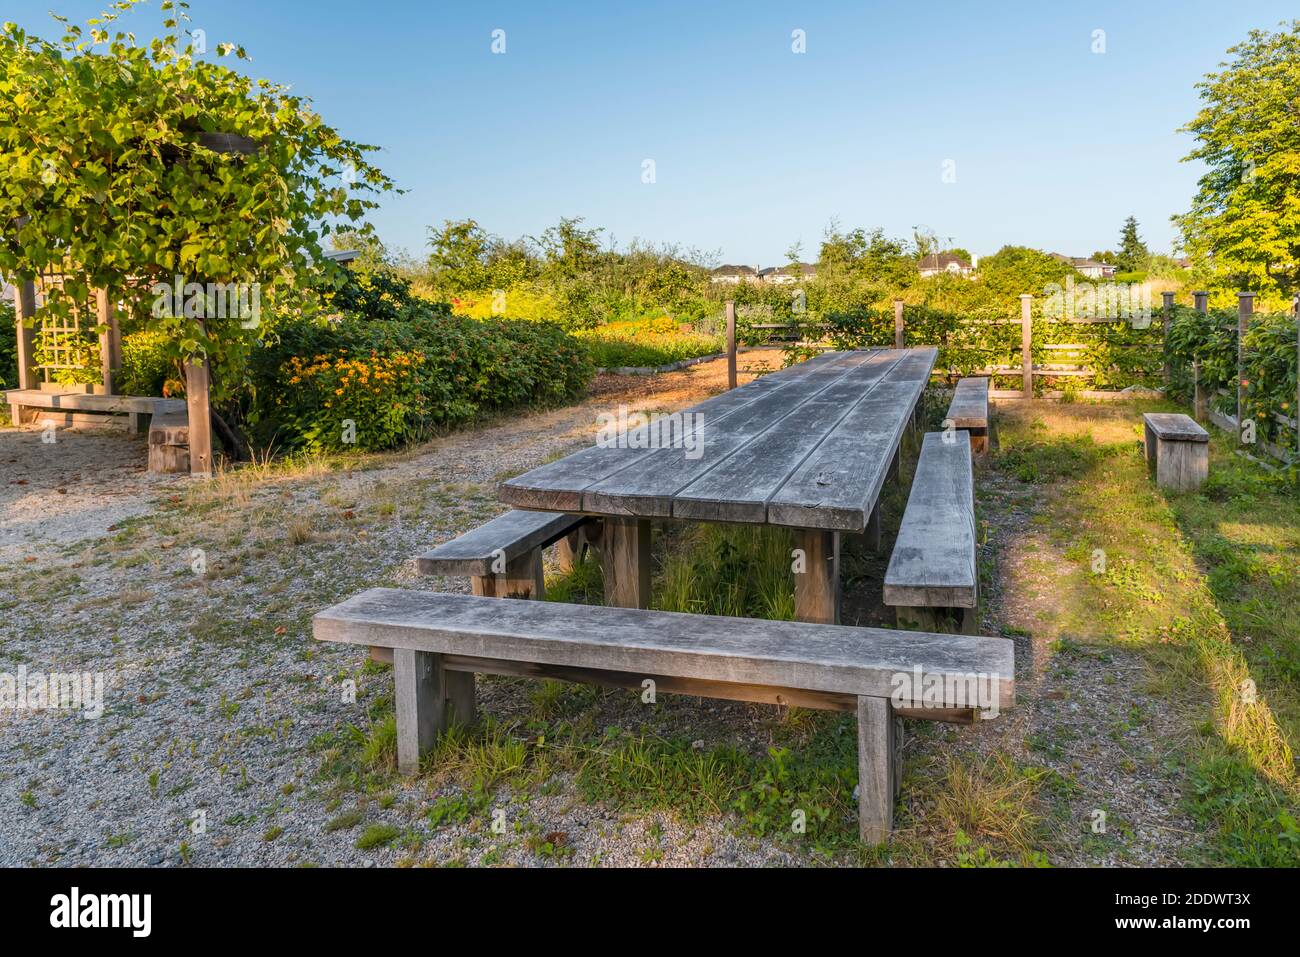 A wooden table and benches dug in the ground, a porch covered with grape plants, a flower bed, fruits of apples hanging from the trees along the woode Stock Photo